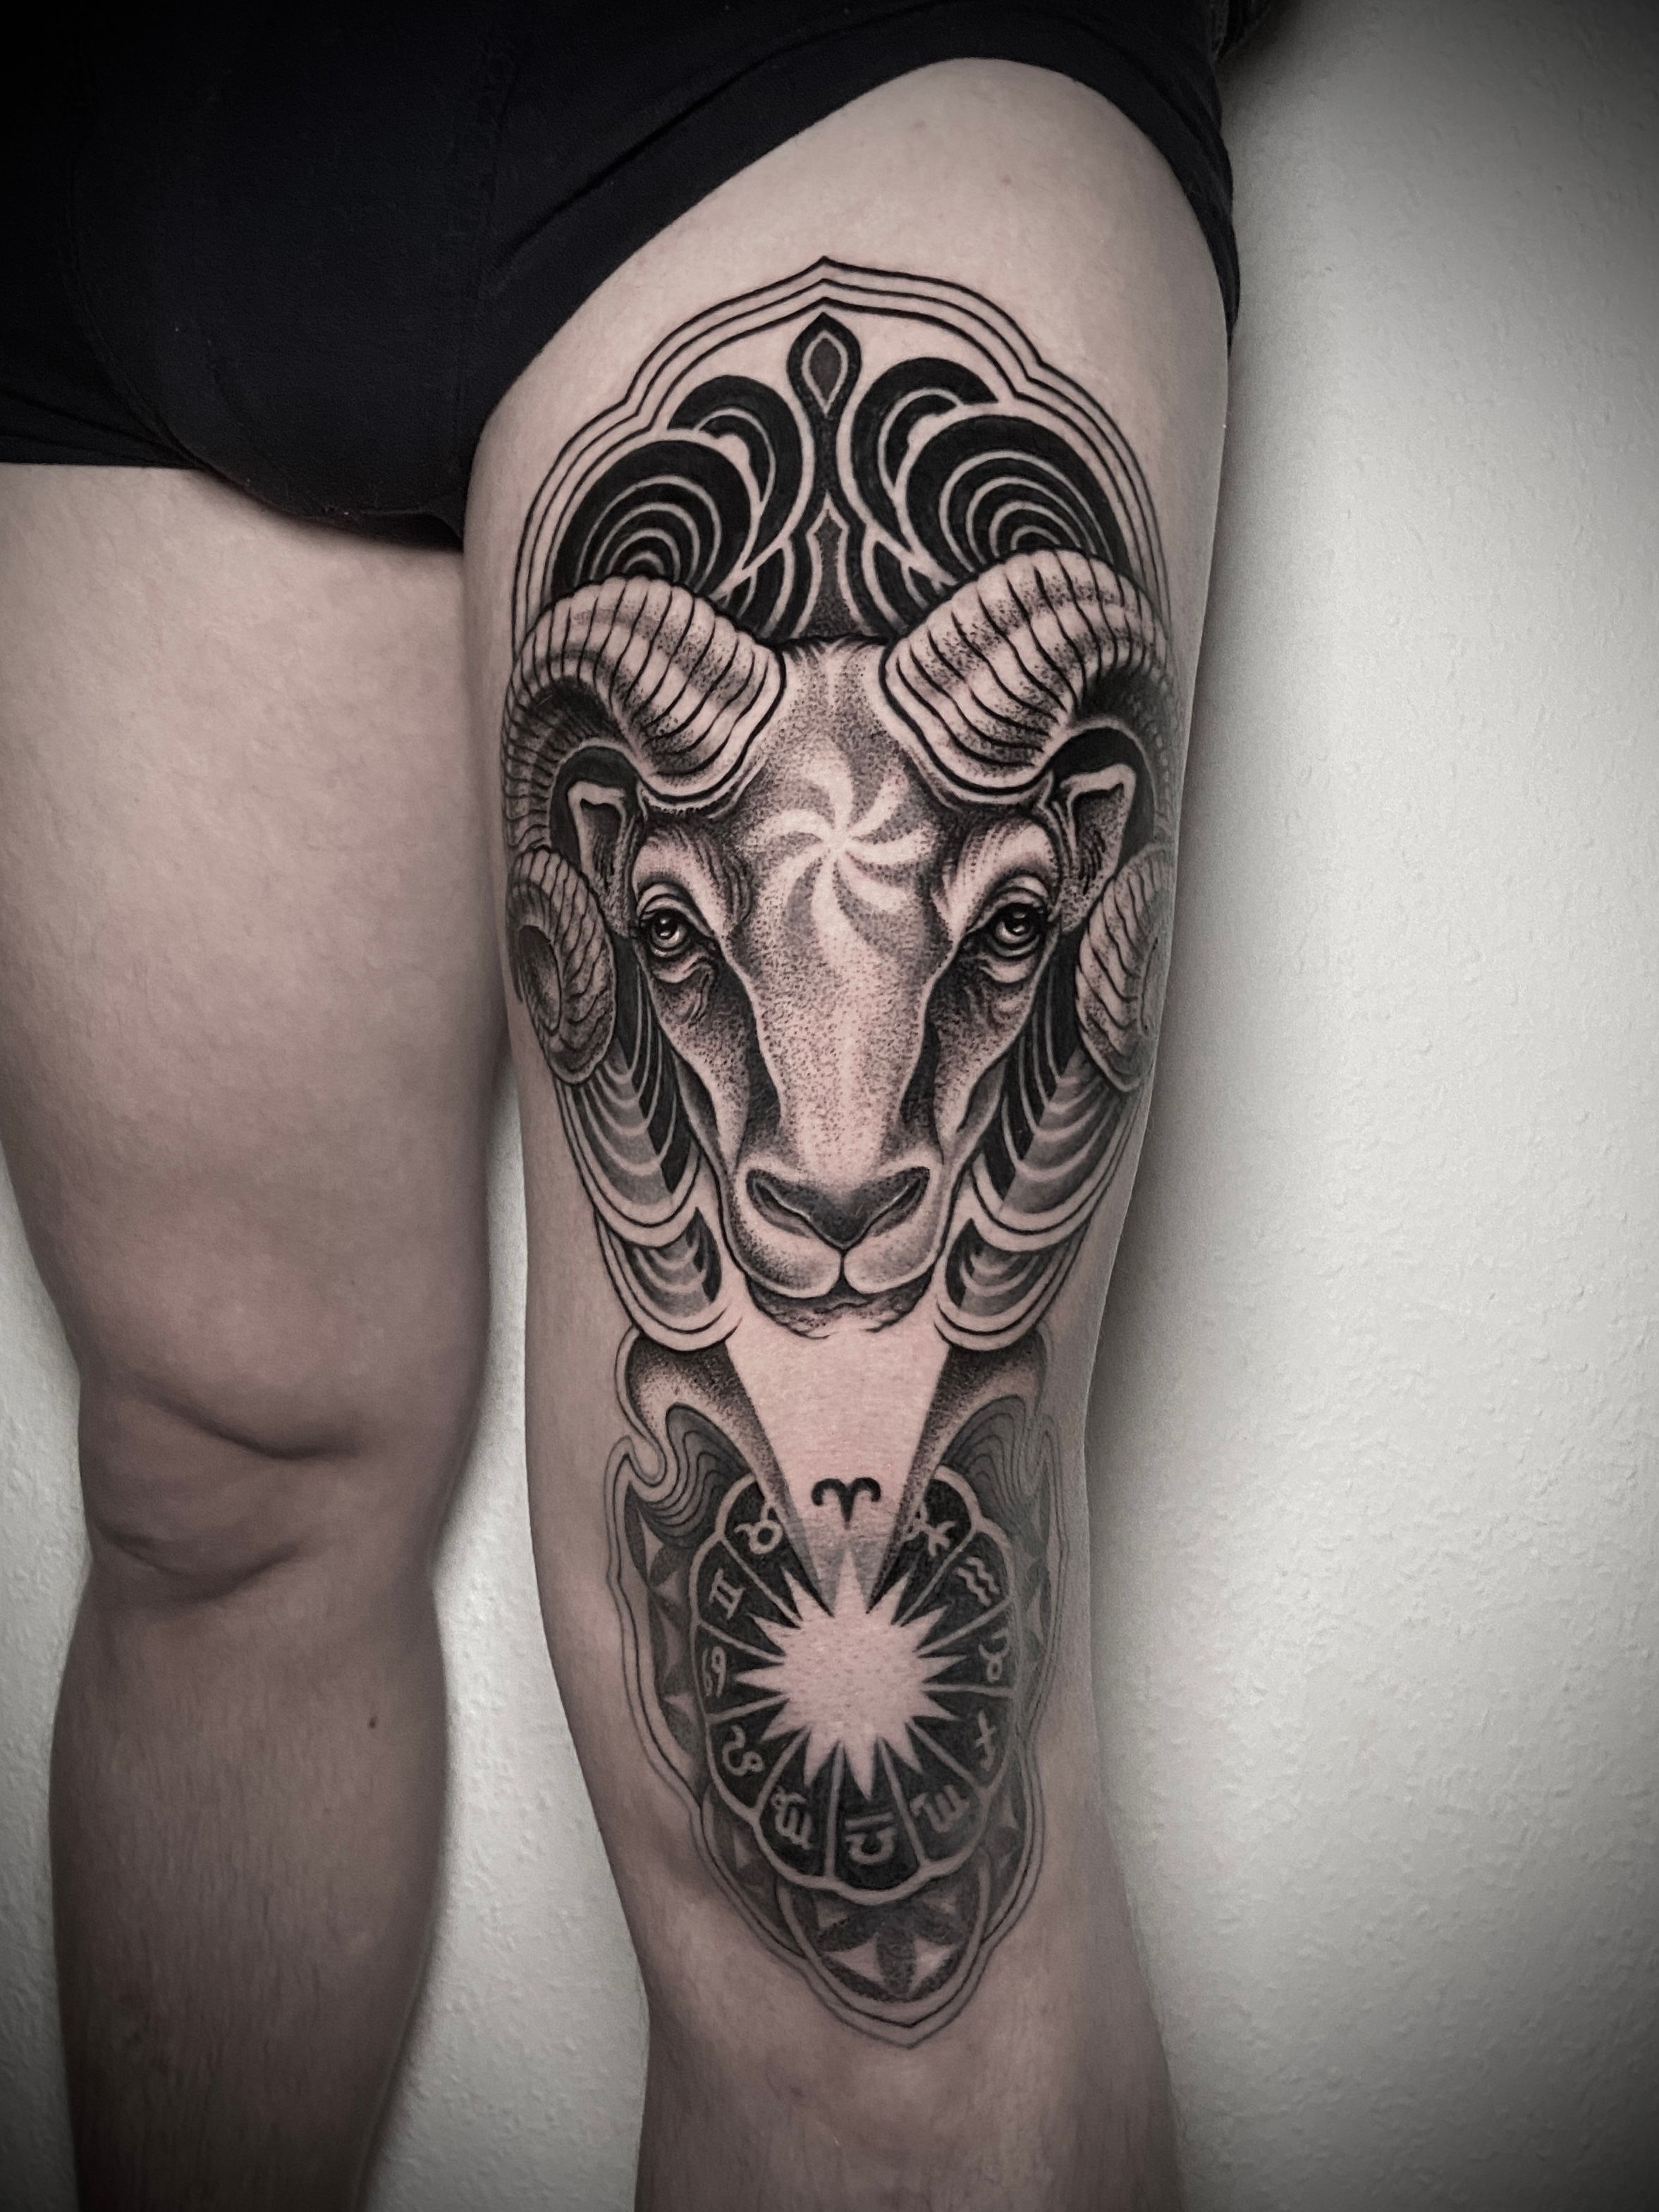 Aries Tattoo- Noida - Customized design; 𝗟𝗼𝗿𝗱 𝗦𝗵𝗶𝘃 𝘄𝗶𝘁𝗵  𝗧𝗿𝗶𝘀𝗵𝘂𝗹 Done By 𝗠𝗮𝗻𝗱𝗲𝗲𝗽 𝗛𝗮𝗹𝗱𝗲𝗿. nick_mathur526 .  𝗢𝗳𝗳𝗲𝗿. 𝟱𝟬% 𝗼𝗳𝗳 in all kind of Tattoos . Valid 26th jan to 28th  feb. So